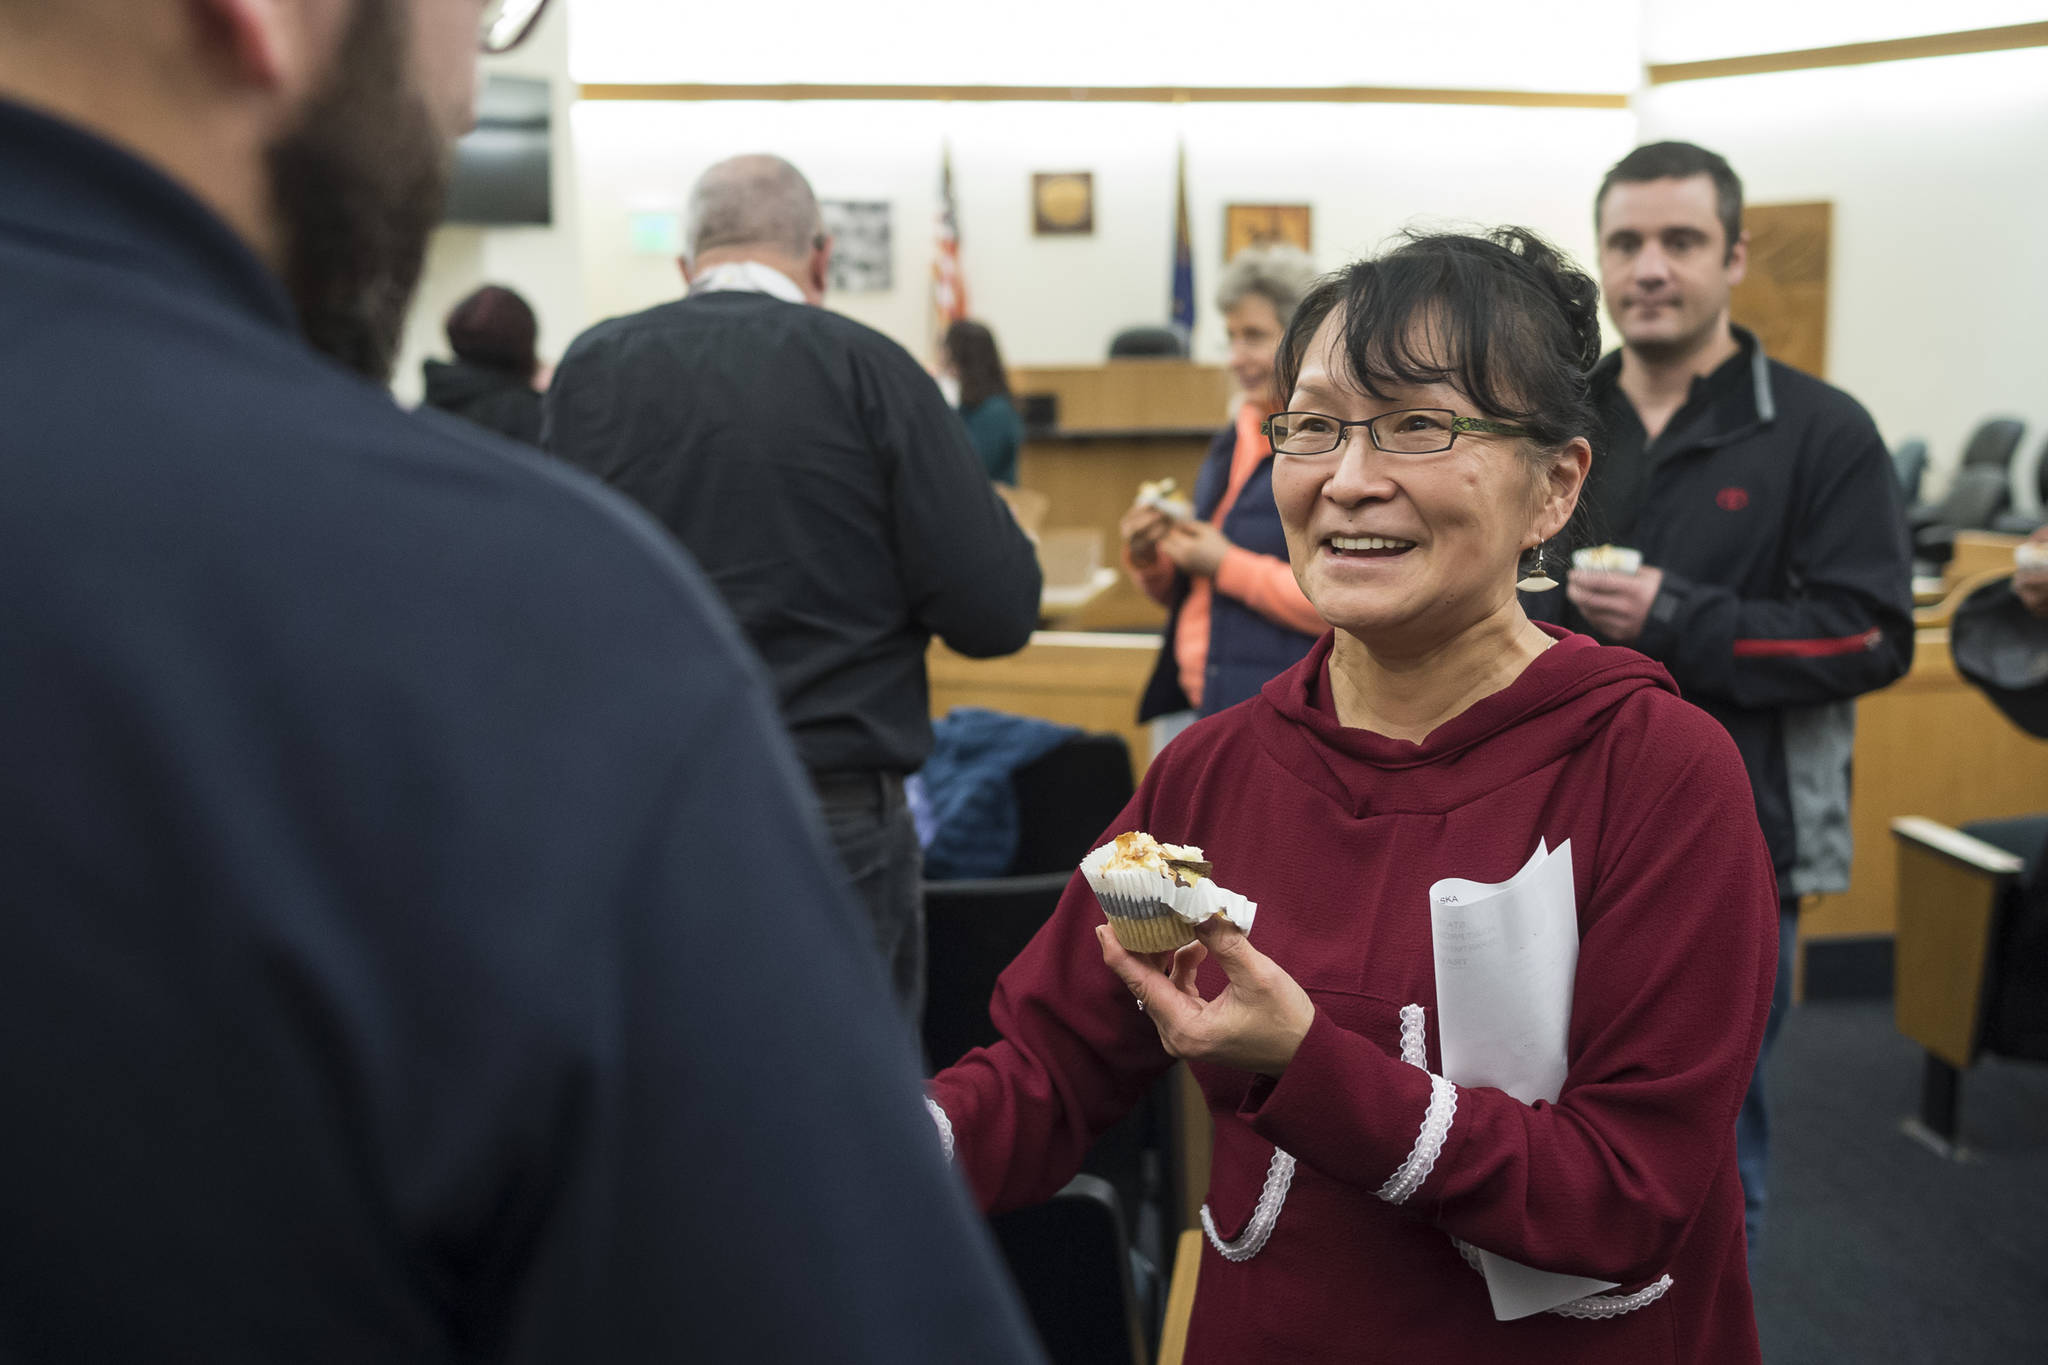 Marie Riley, a recovering alcoholic, receives congratulations and a cupcake after graduating from Juneau’s Therapeutic Court on Thursday, Nov. 15, 2018. (Michael Penn | Juneau Empire)